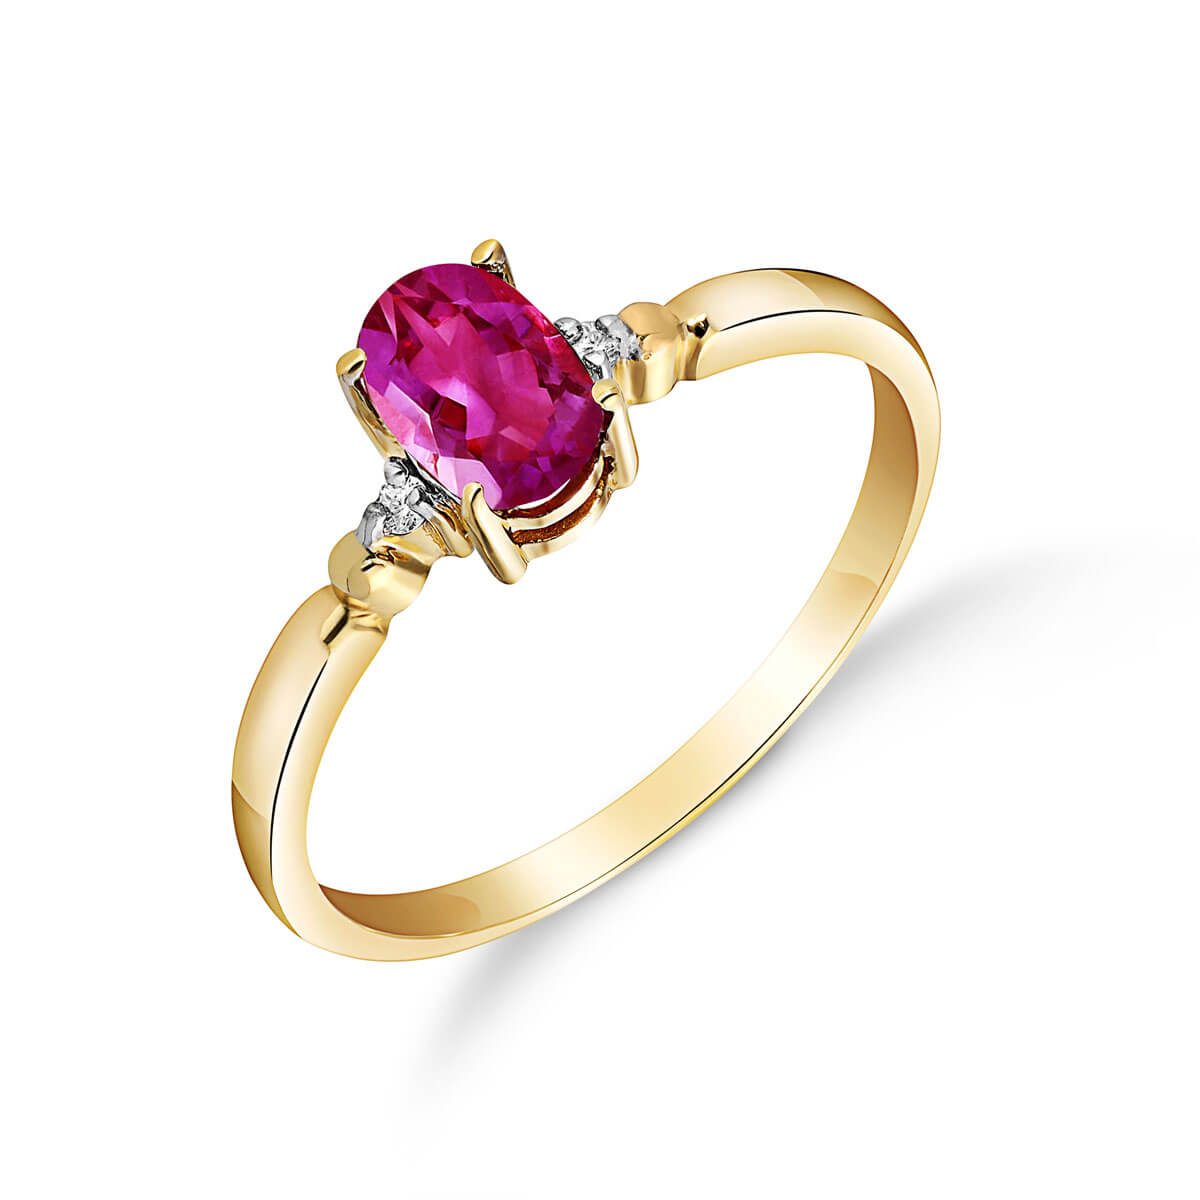 Pink Topaz & Diamond Allure Ring in 18ct Gold